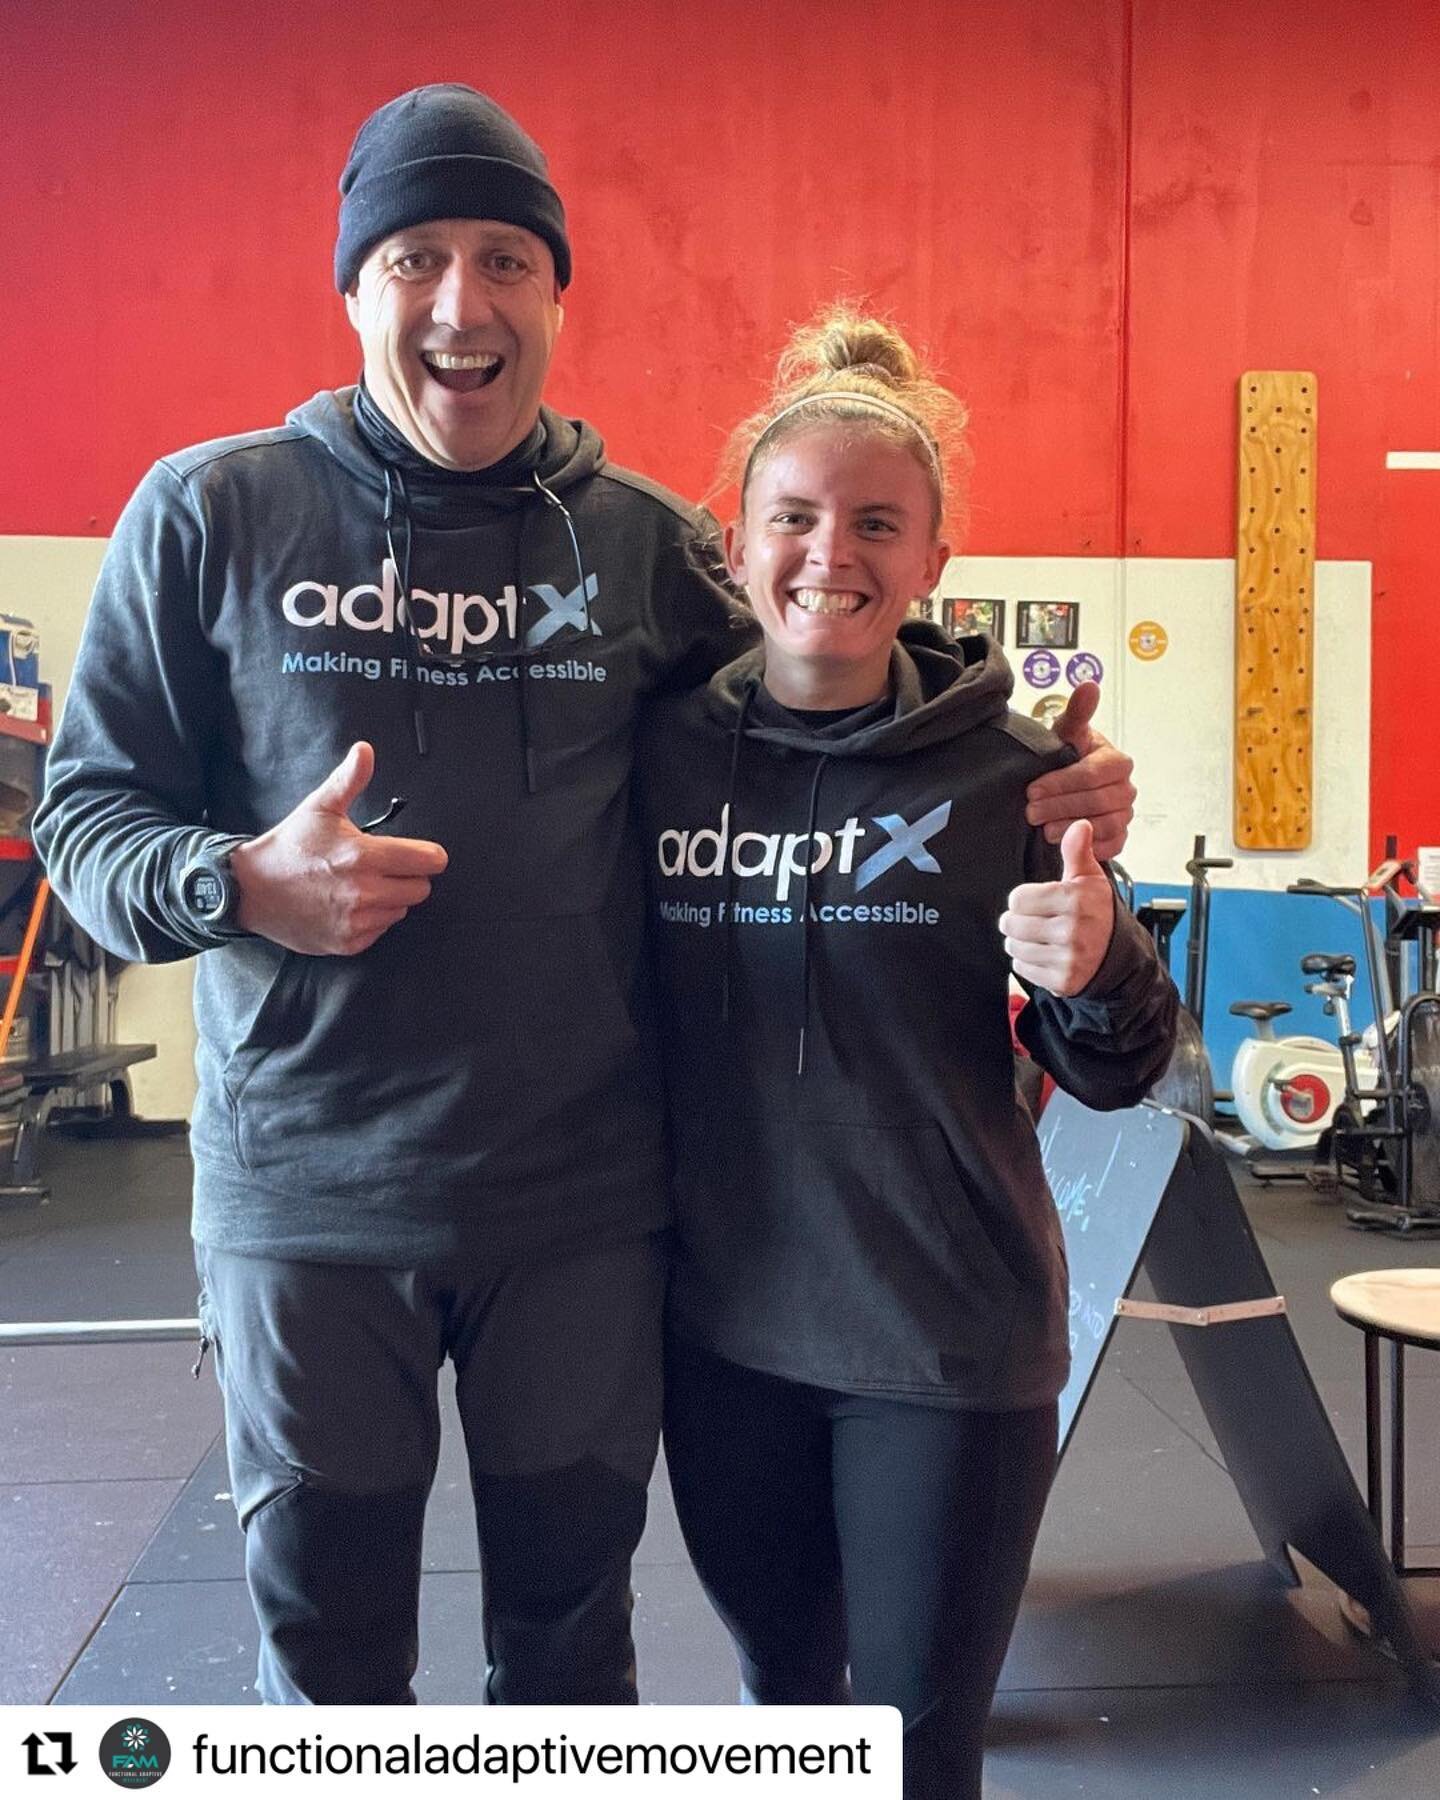 Grateful for our friends in New Zealand, Michael and Jodie, for supporting our work with AdaptX. Having a small impact in another country is surreal. 

Give @functionaladaptivemovement a follow. They&rsquo;re doing incredible work serving hundreds of